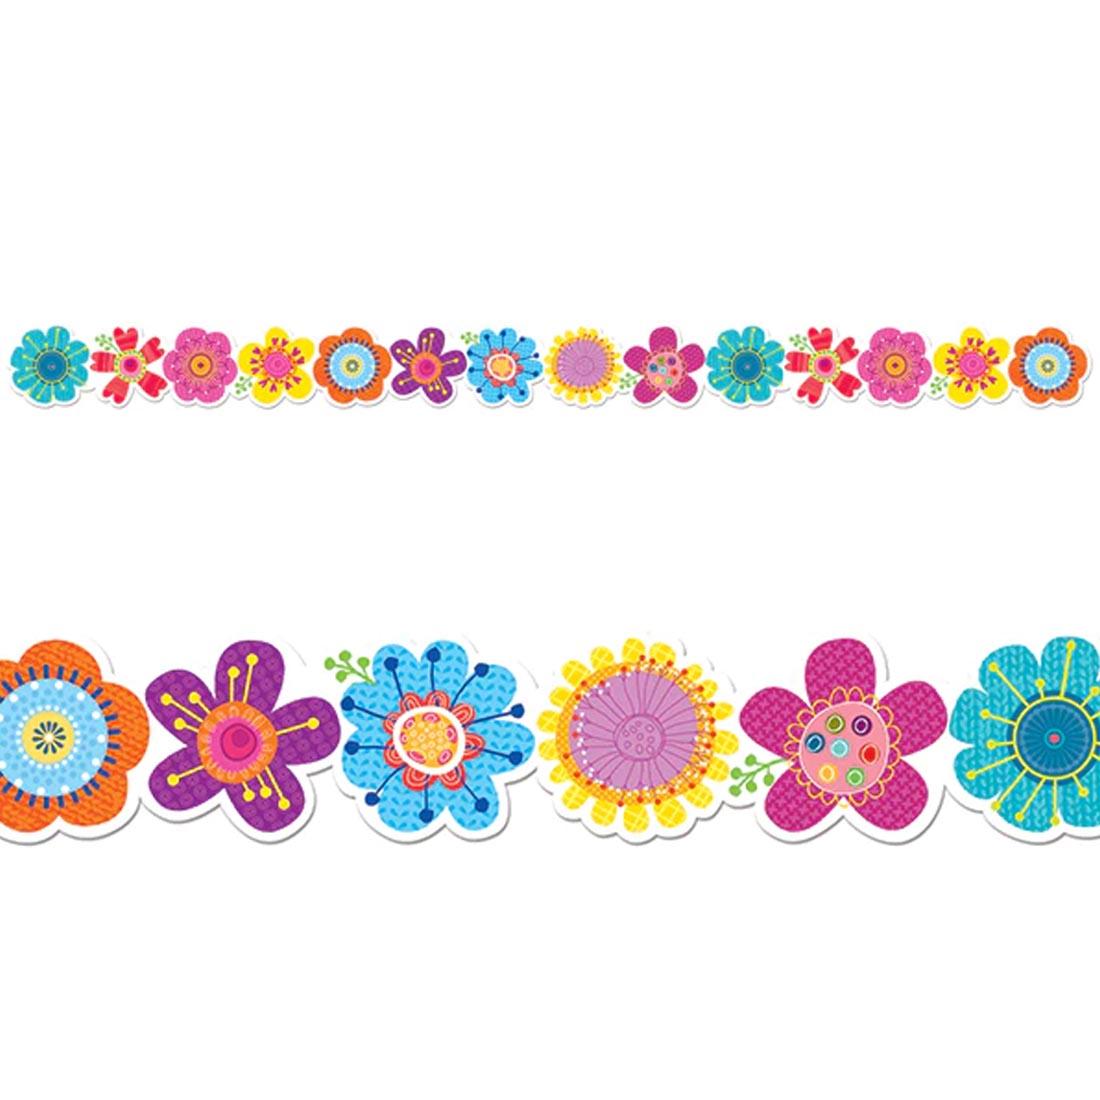 Springtime Blooms EZ Border By Creative Teaching Press, featuring flowers in various styles and colors